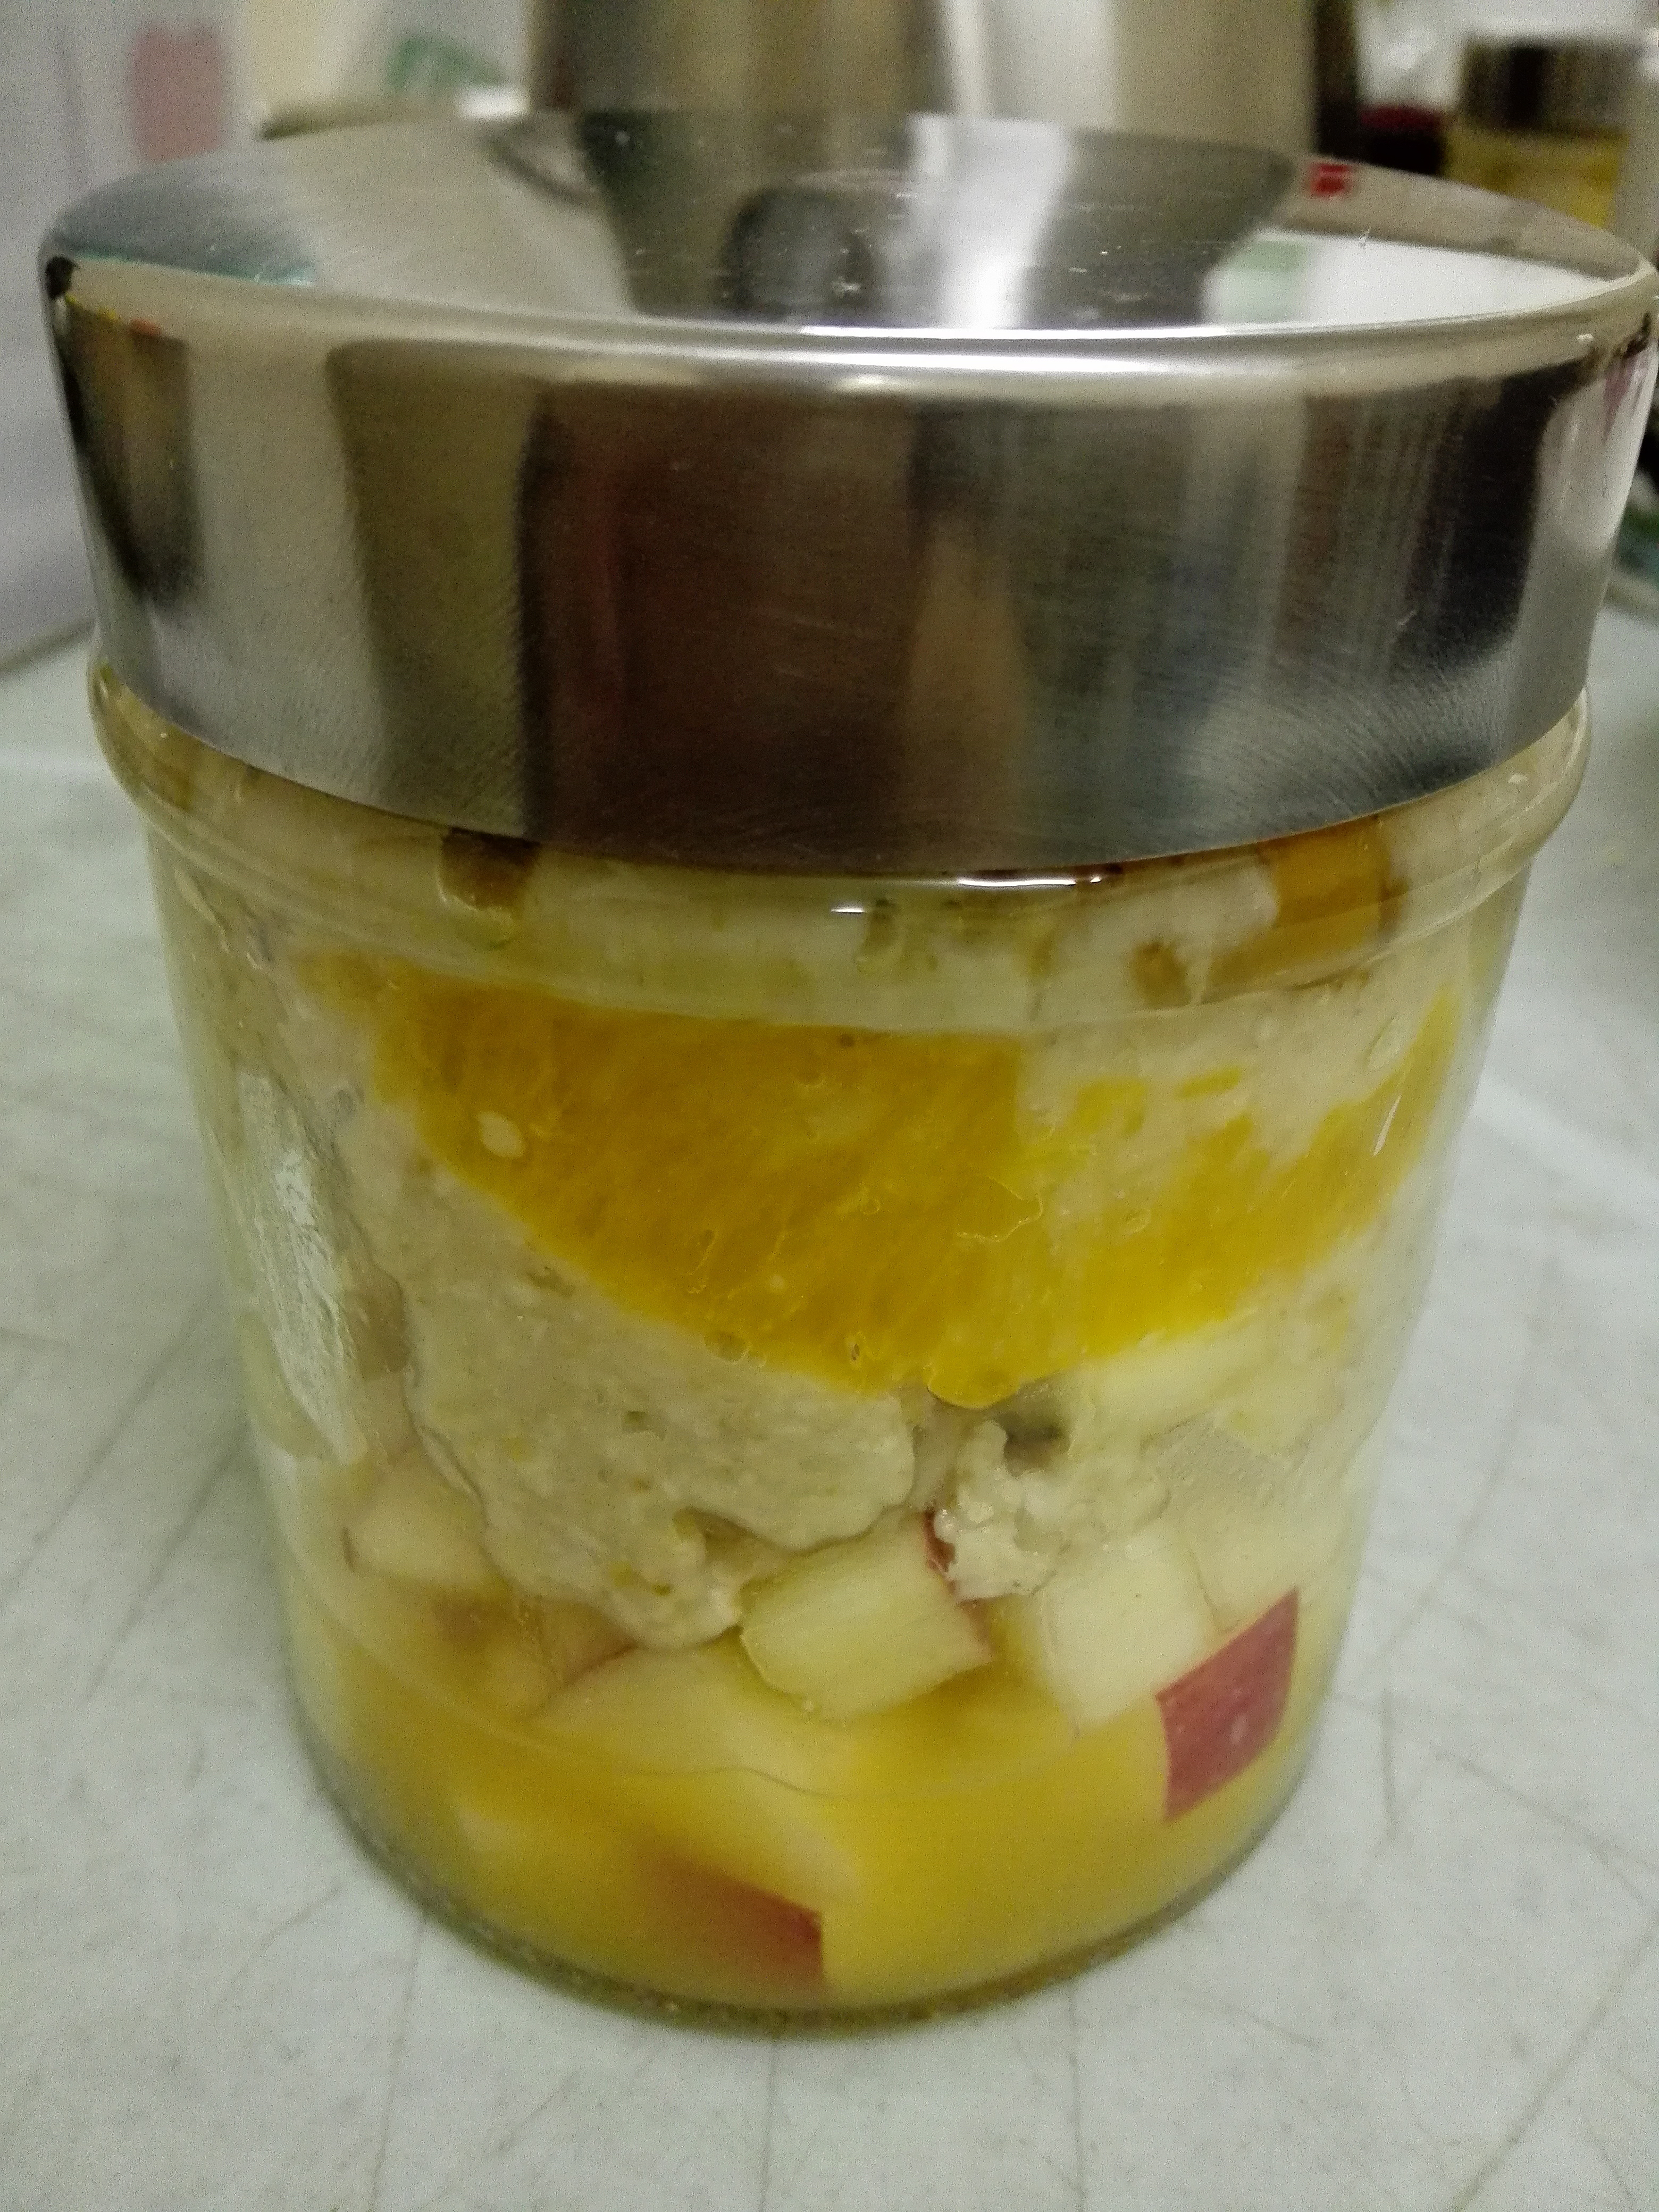 Simplified version of overnight oatmeal